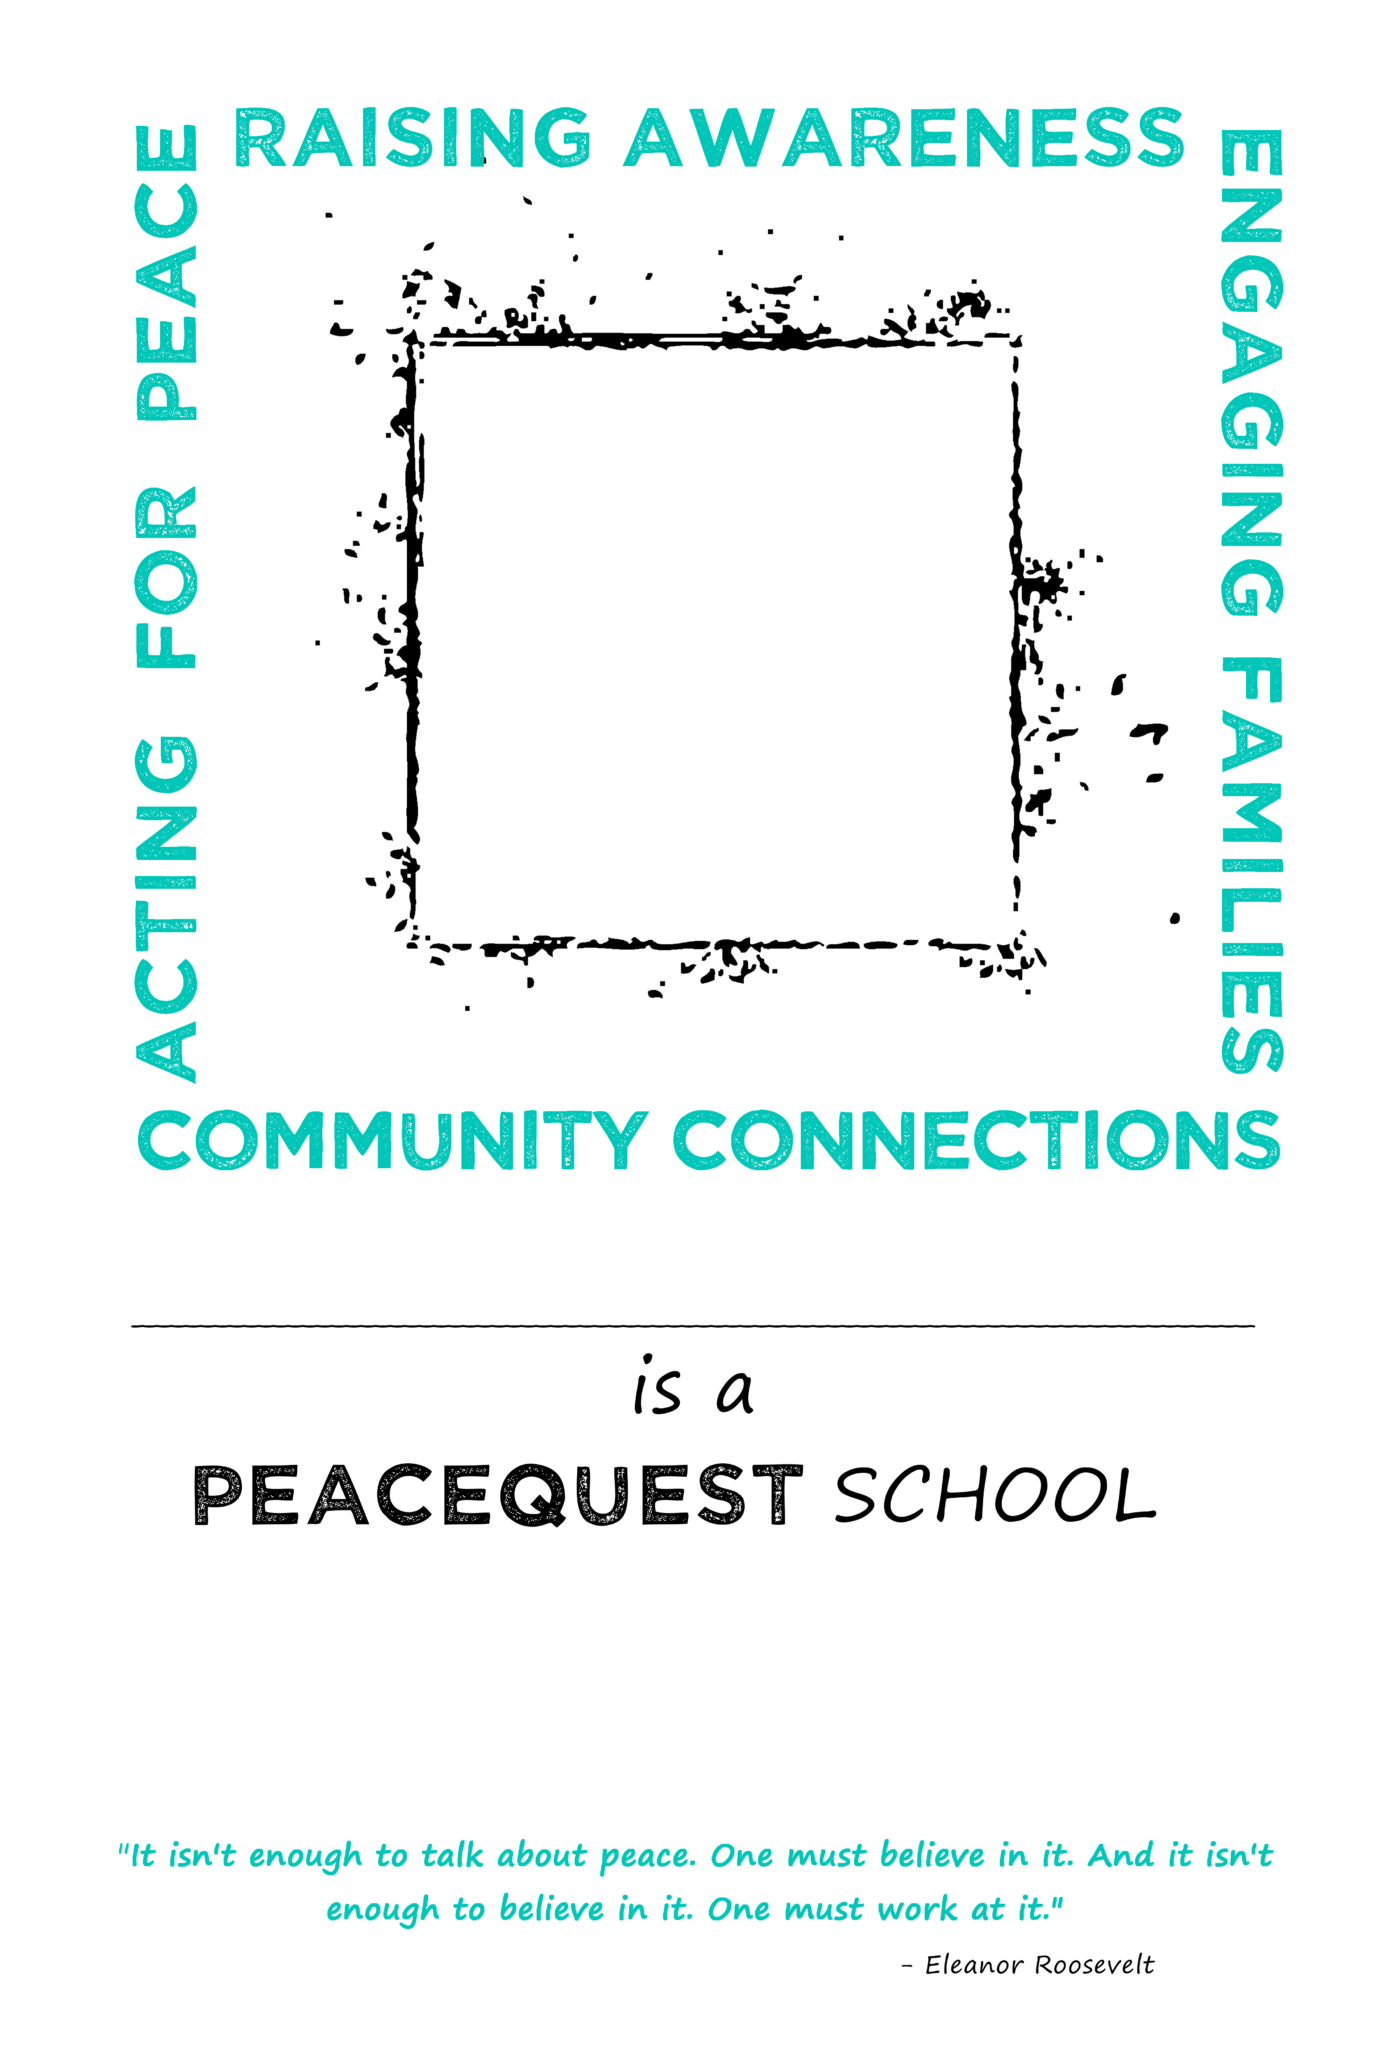 Become a PeaceQuest School!